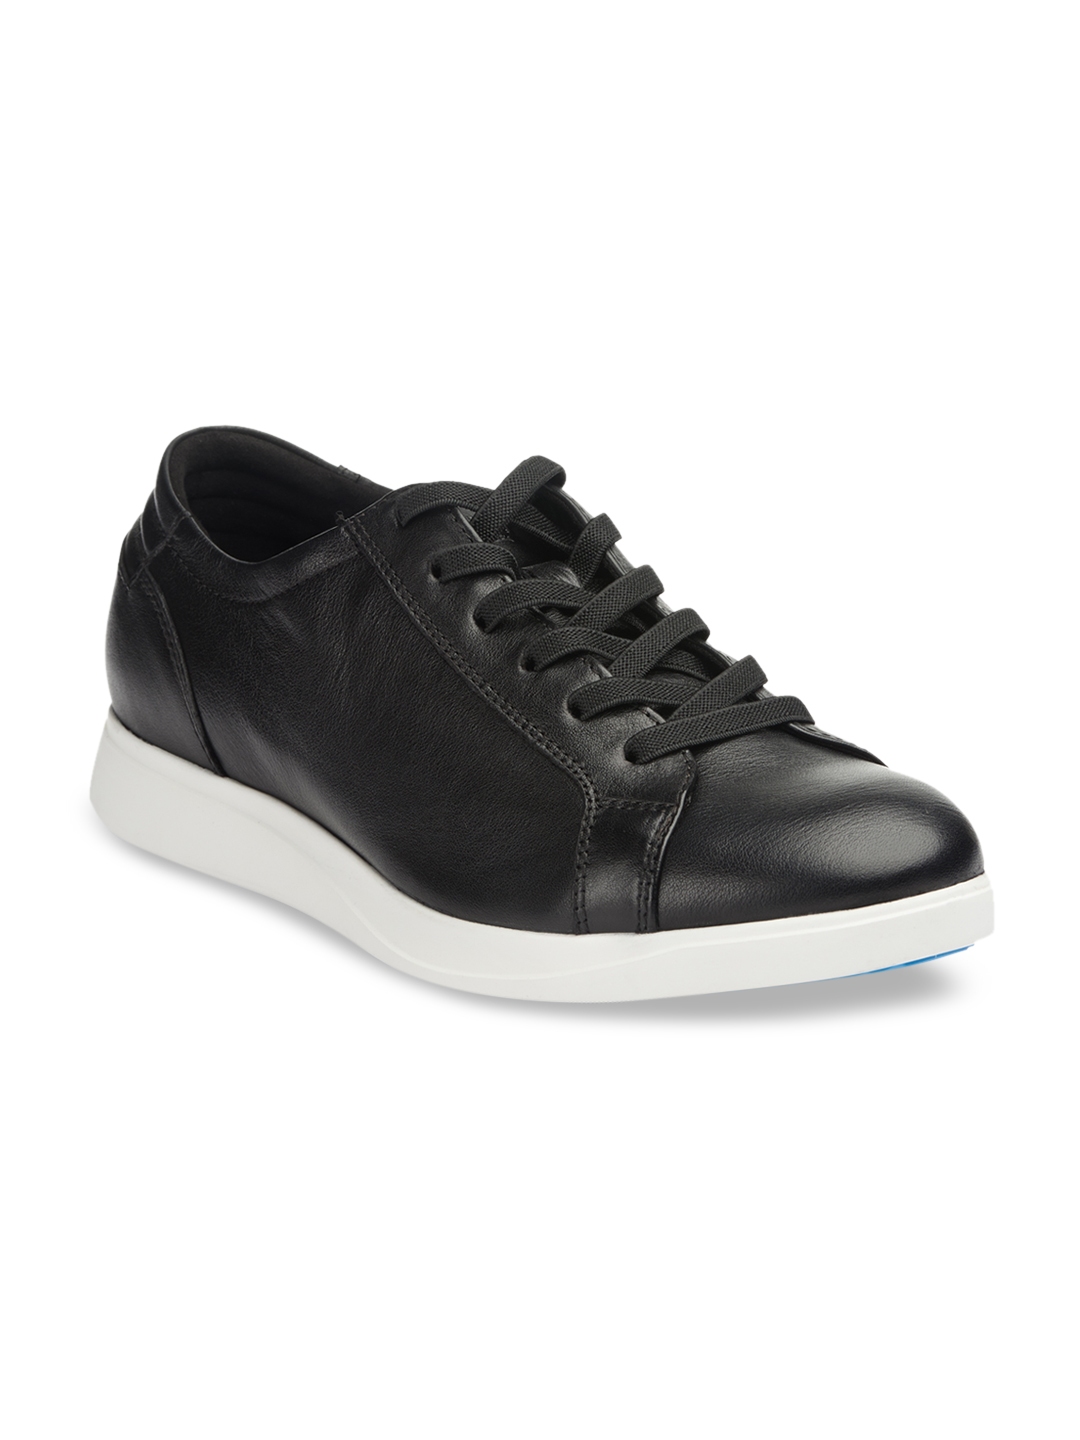 Buy Kenneth Cole Men Black Leather Sneakers - Casual Shoes for Men ...